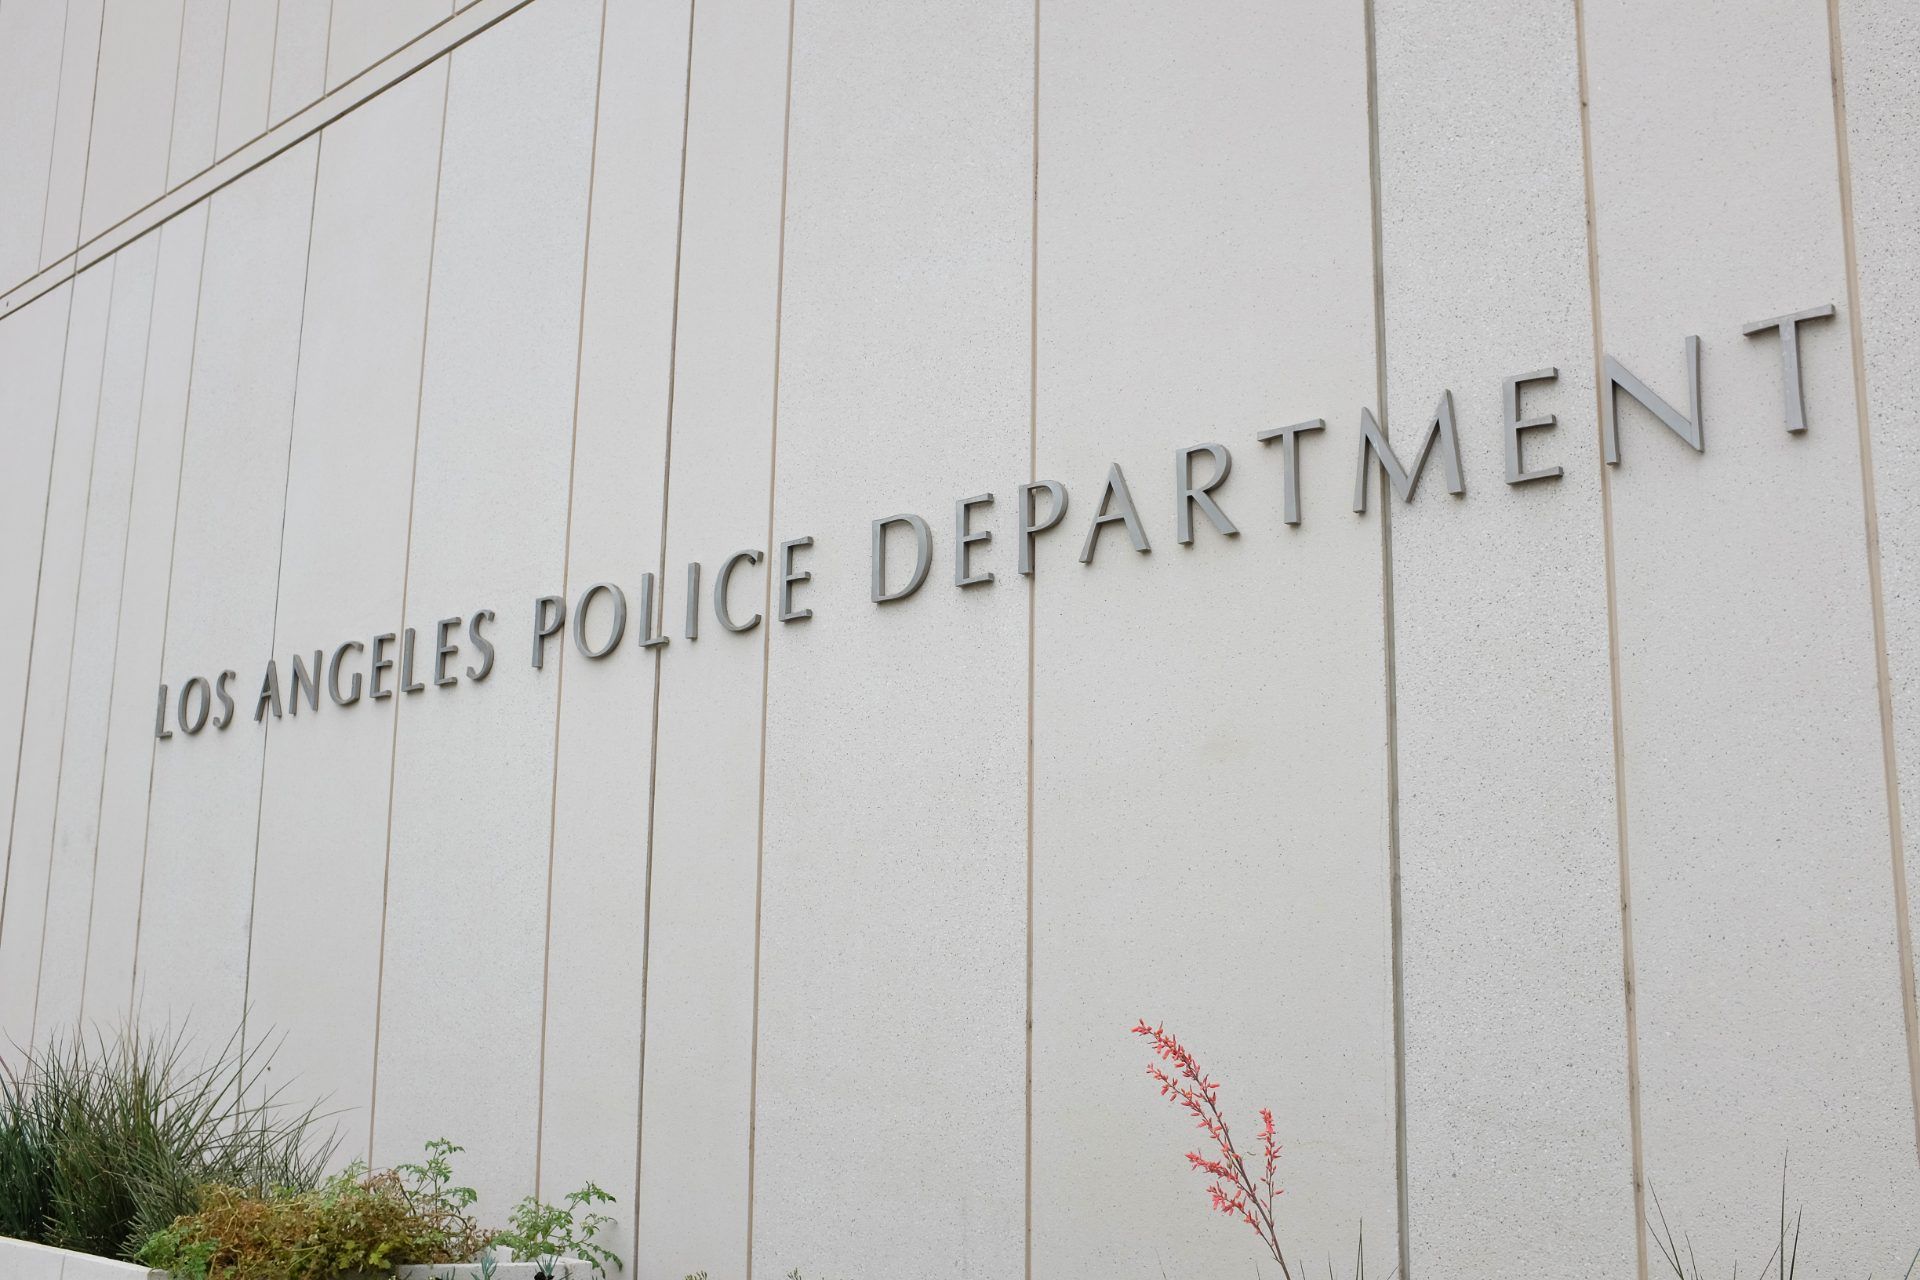 Los Angeles Police Department building - LAPD officers